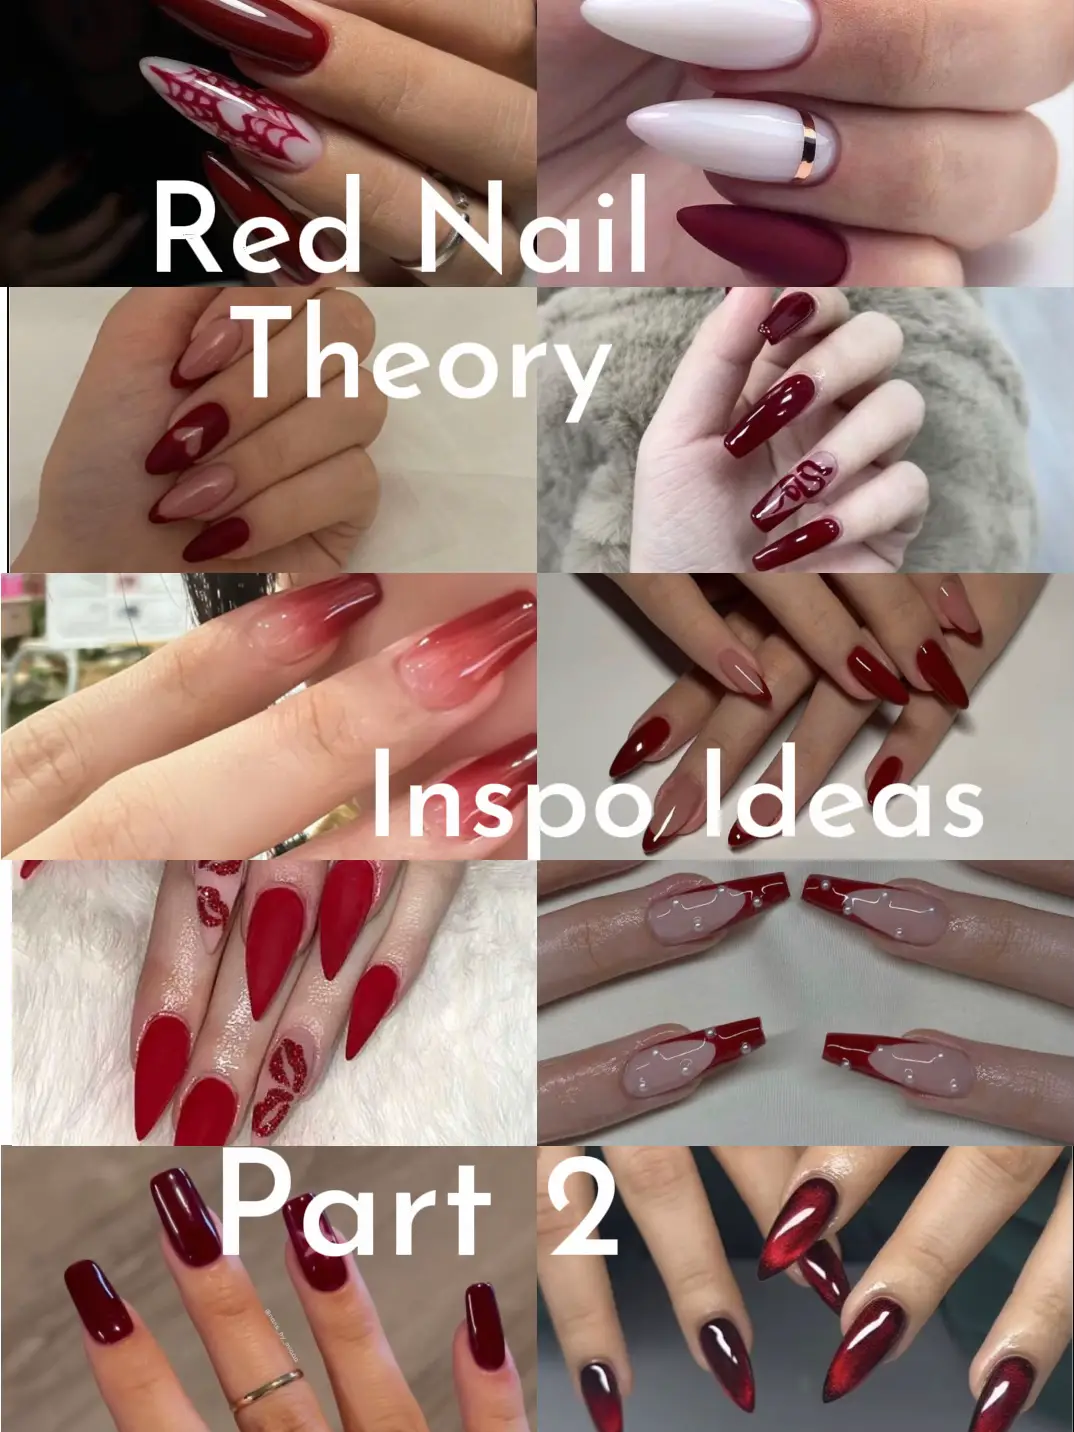 The Black Nail Theory Is Going Viral On TikTok, But What Is It?